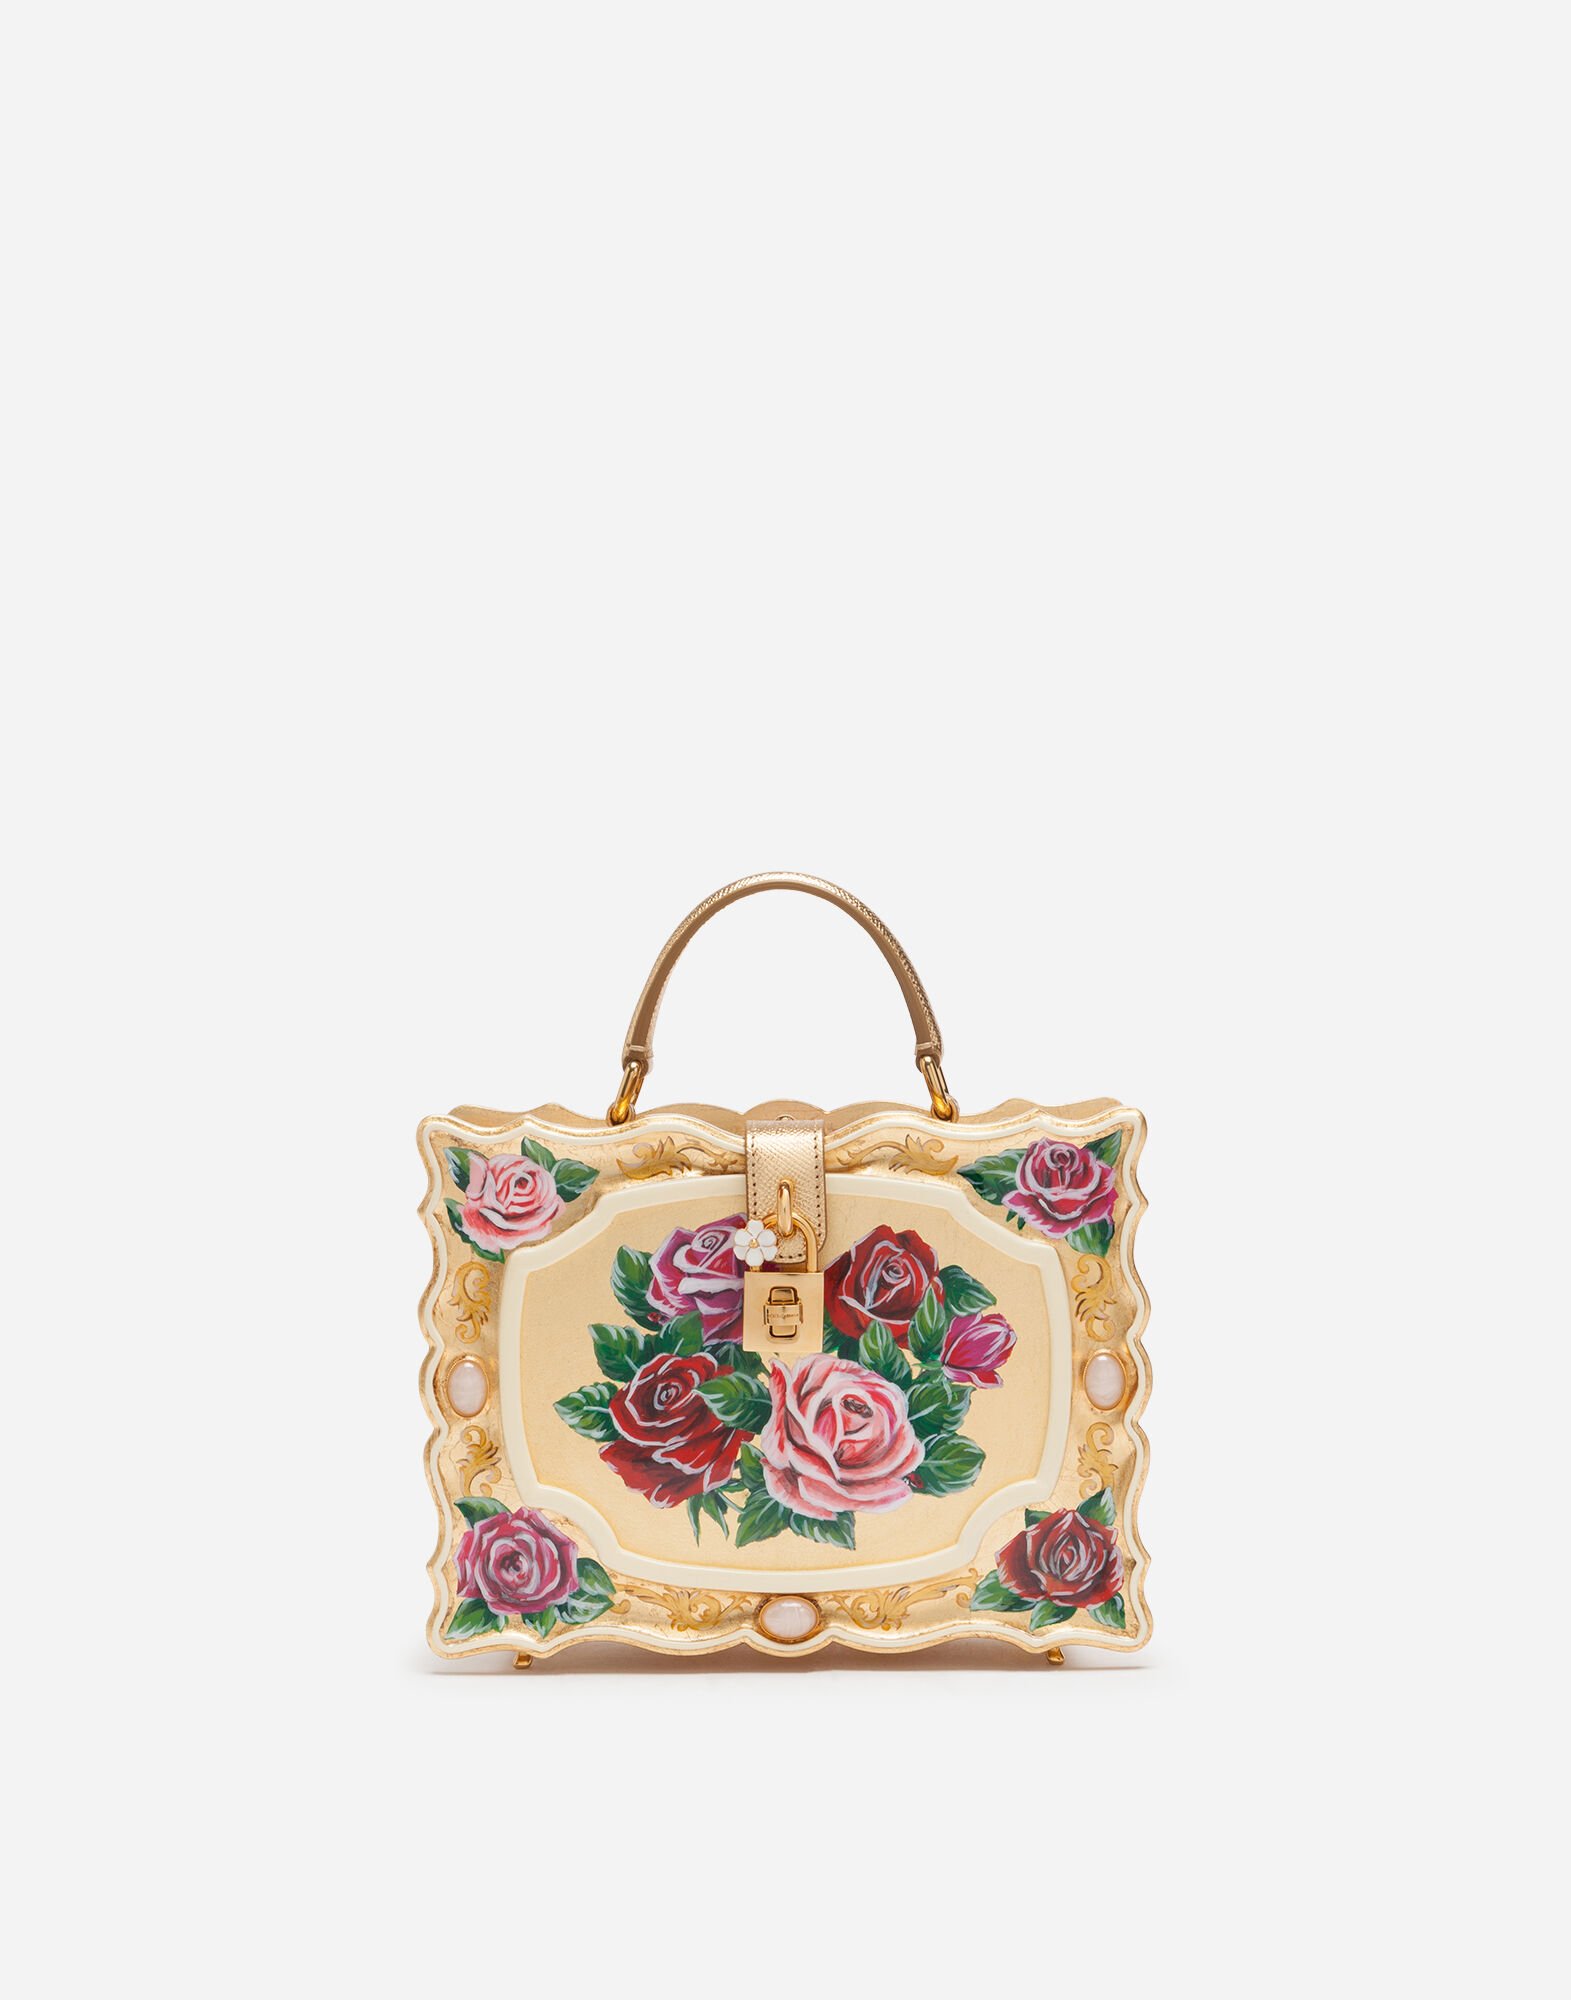 Dolce & Gabbana Dolce Box bag in golden hand-painted wood Multicolor BB5970AY229